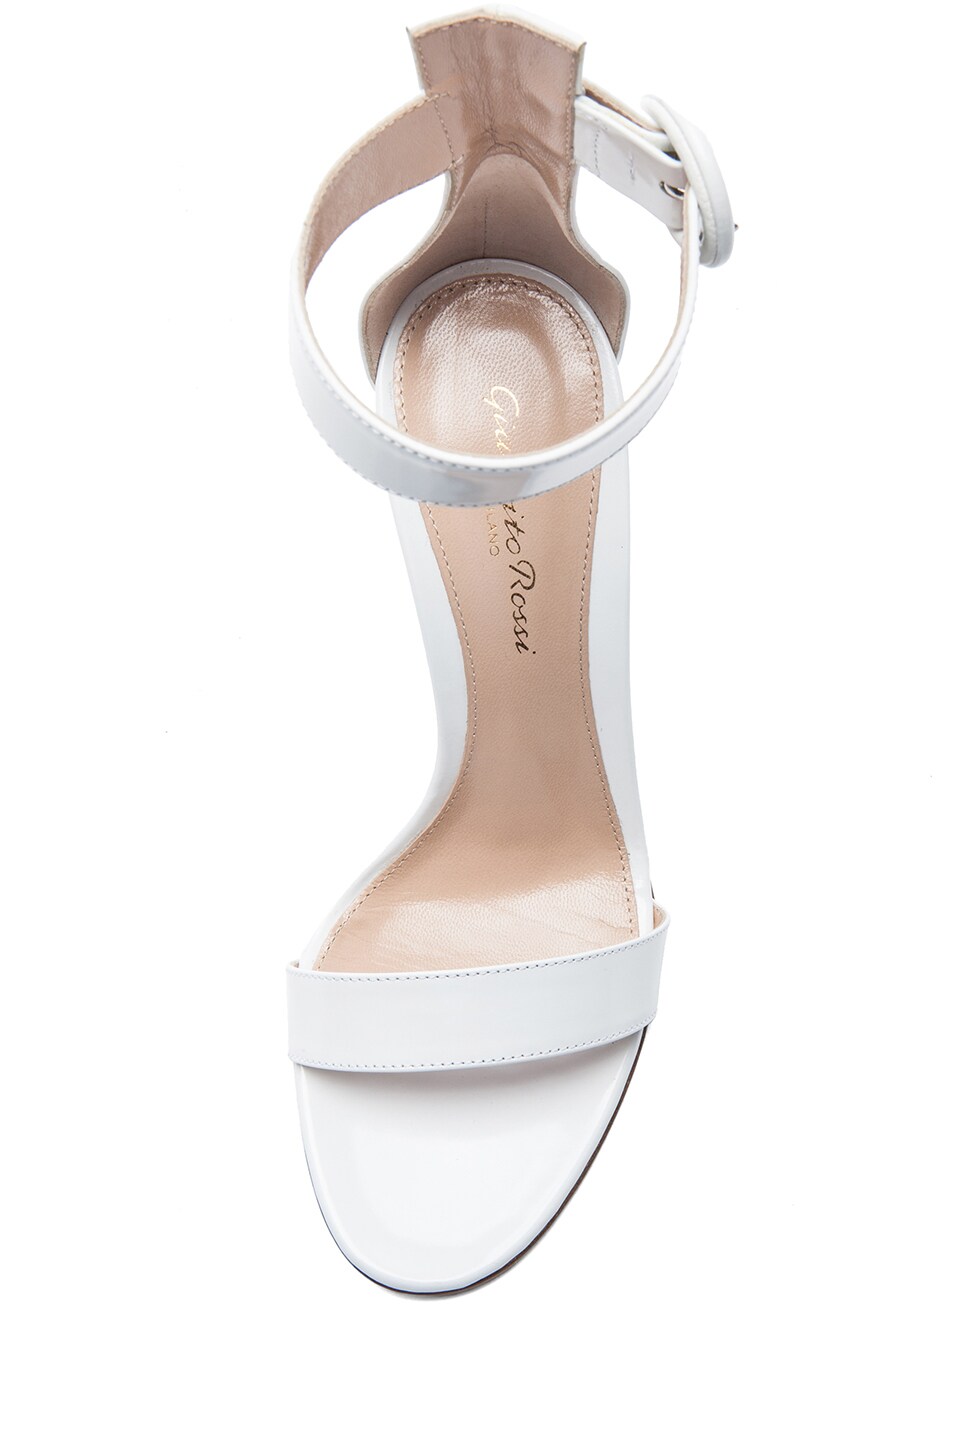 Gianvito Rossi Patent Leather Ankle Strap Sandals in White | FWRD